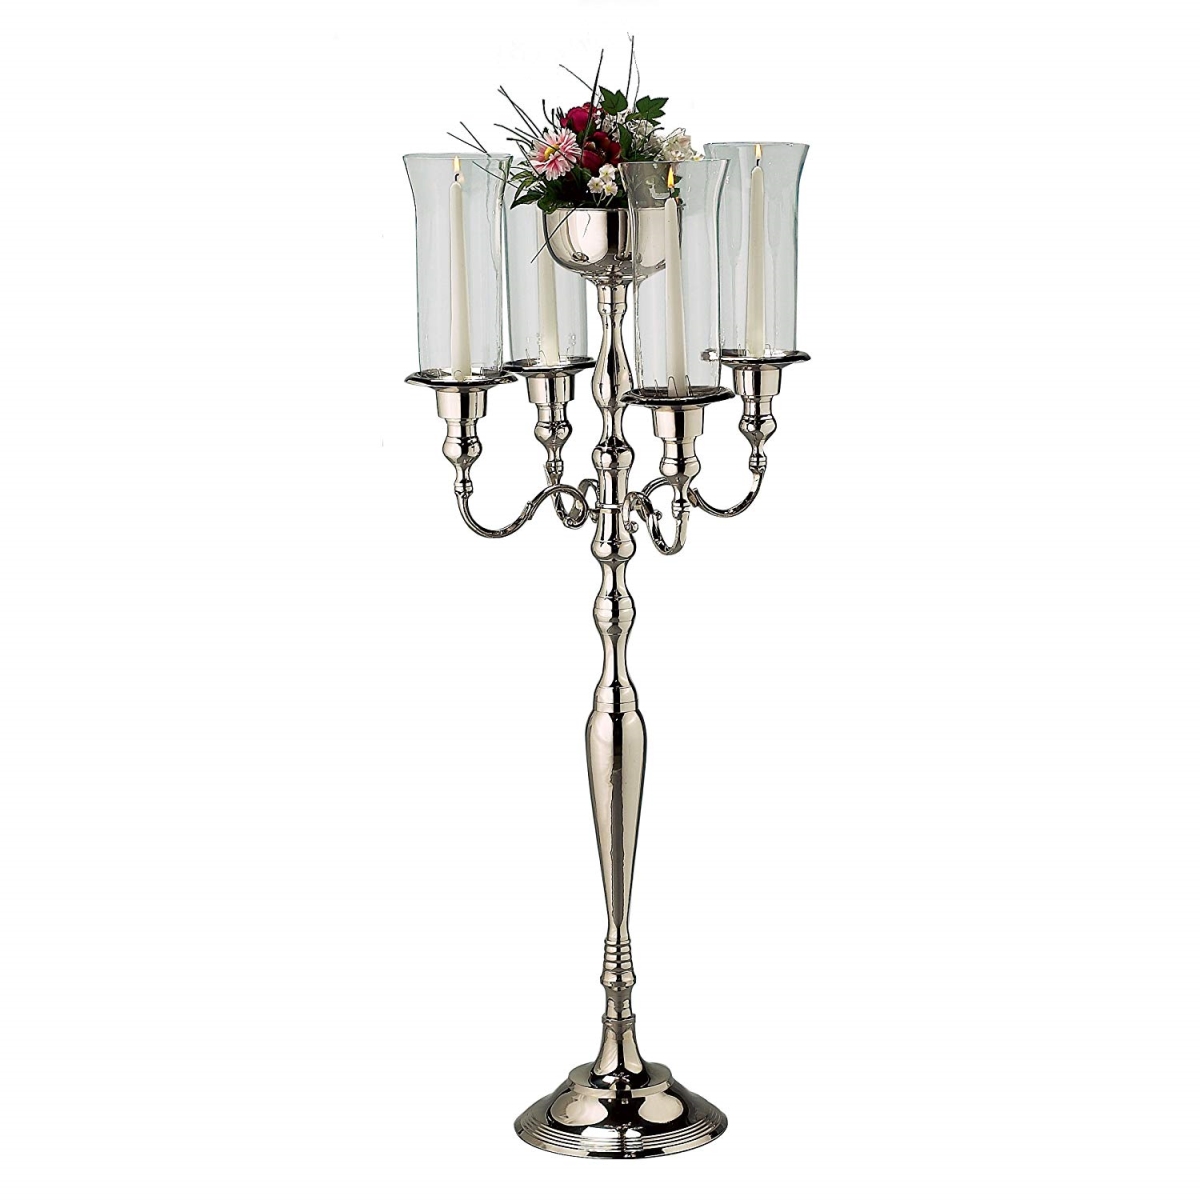 90443 42 In. Nickel Plate 4 Lite Candelabra With Bowl & Hurricanes